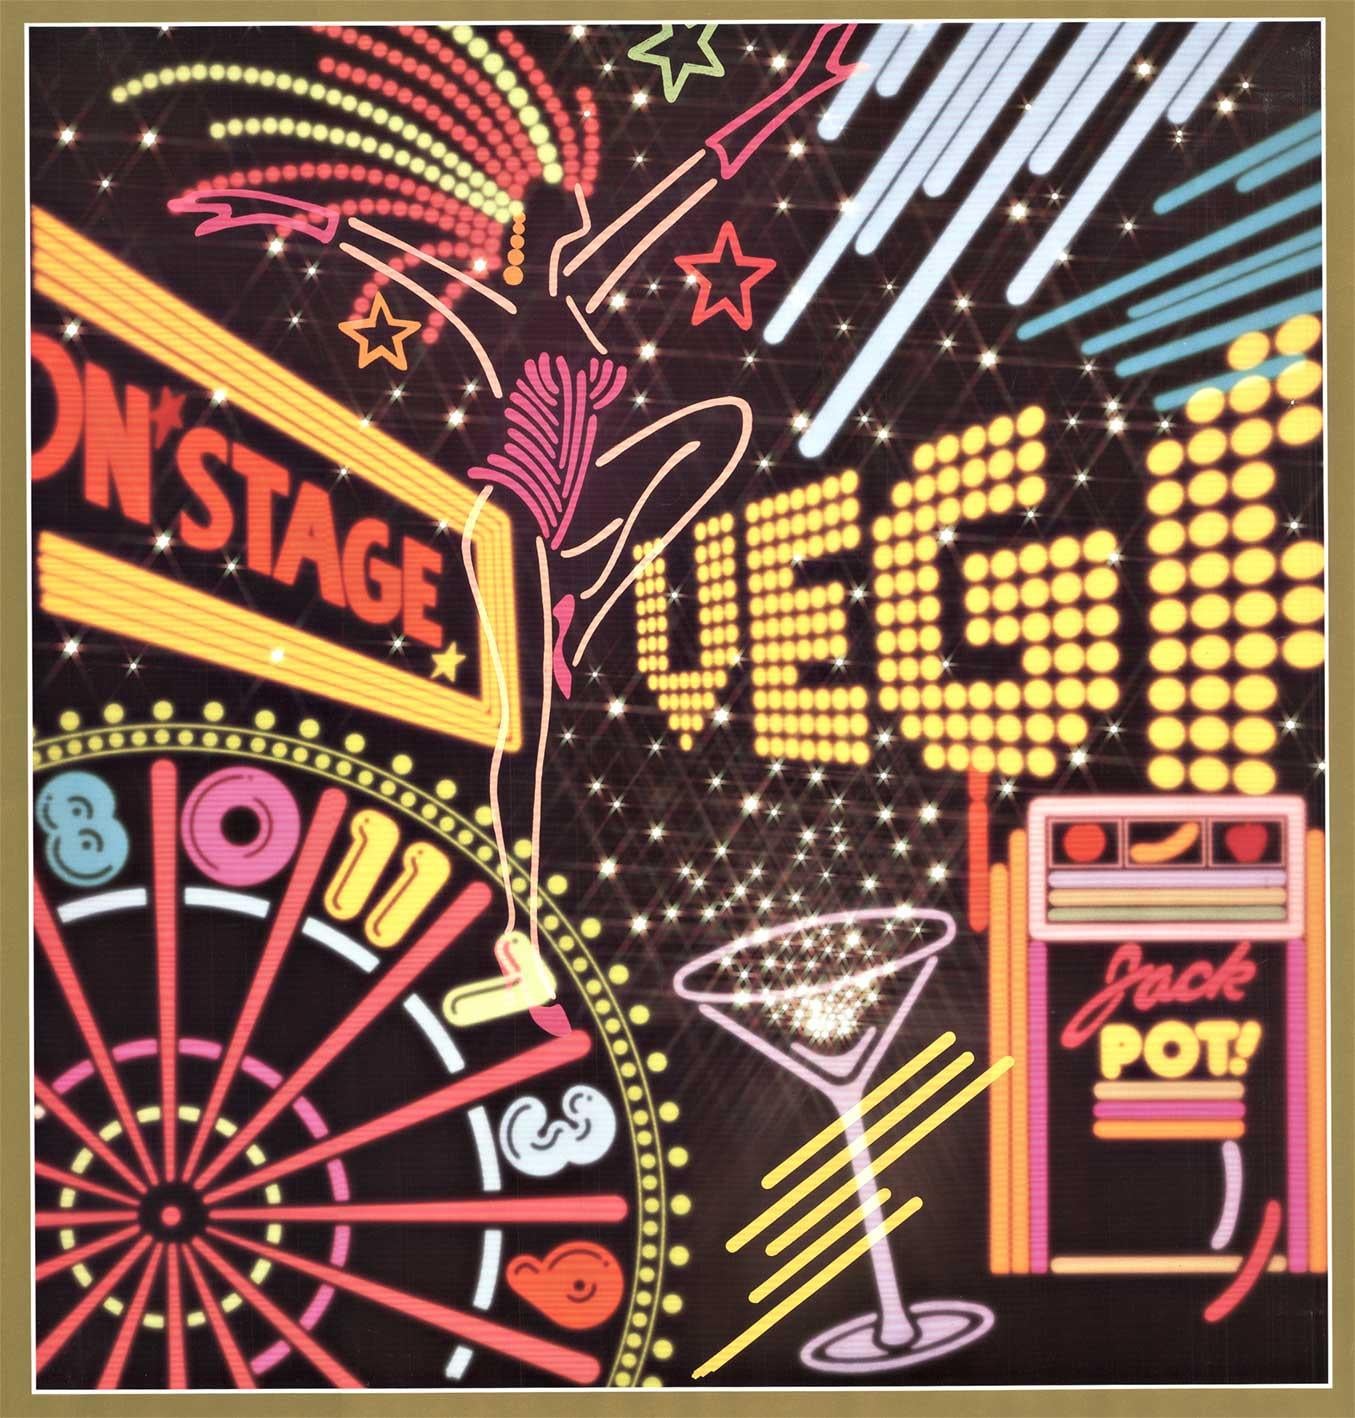 Original Las Vegas Delta Air Lines vintage travel poster  linen backed - Print by Unknown